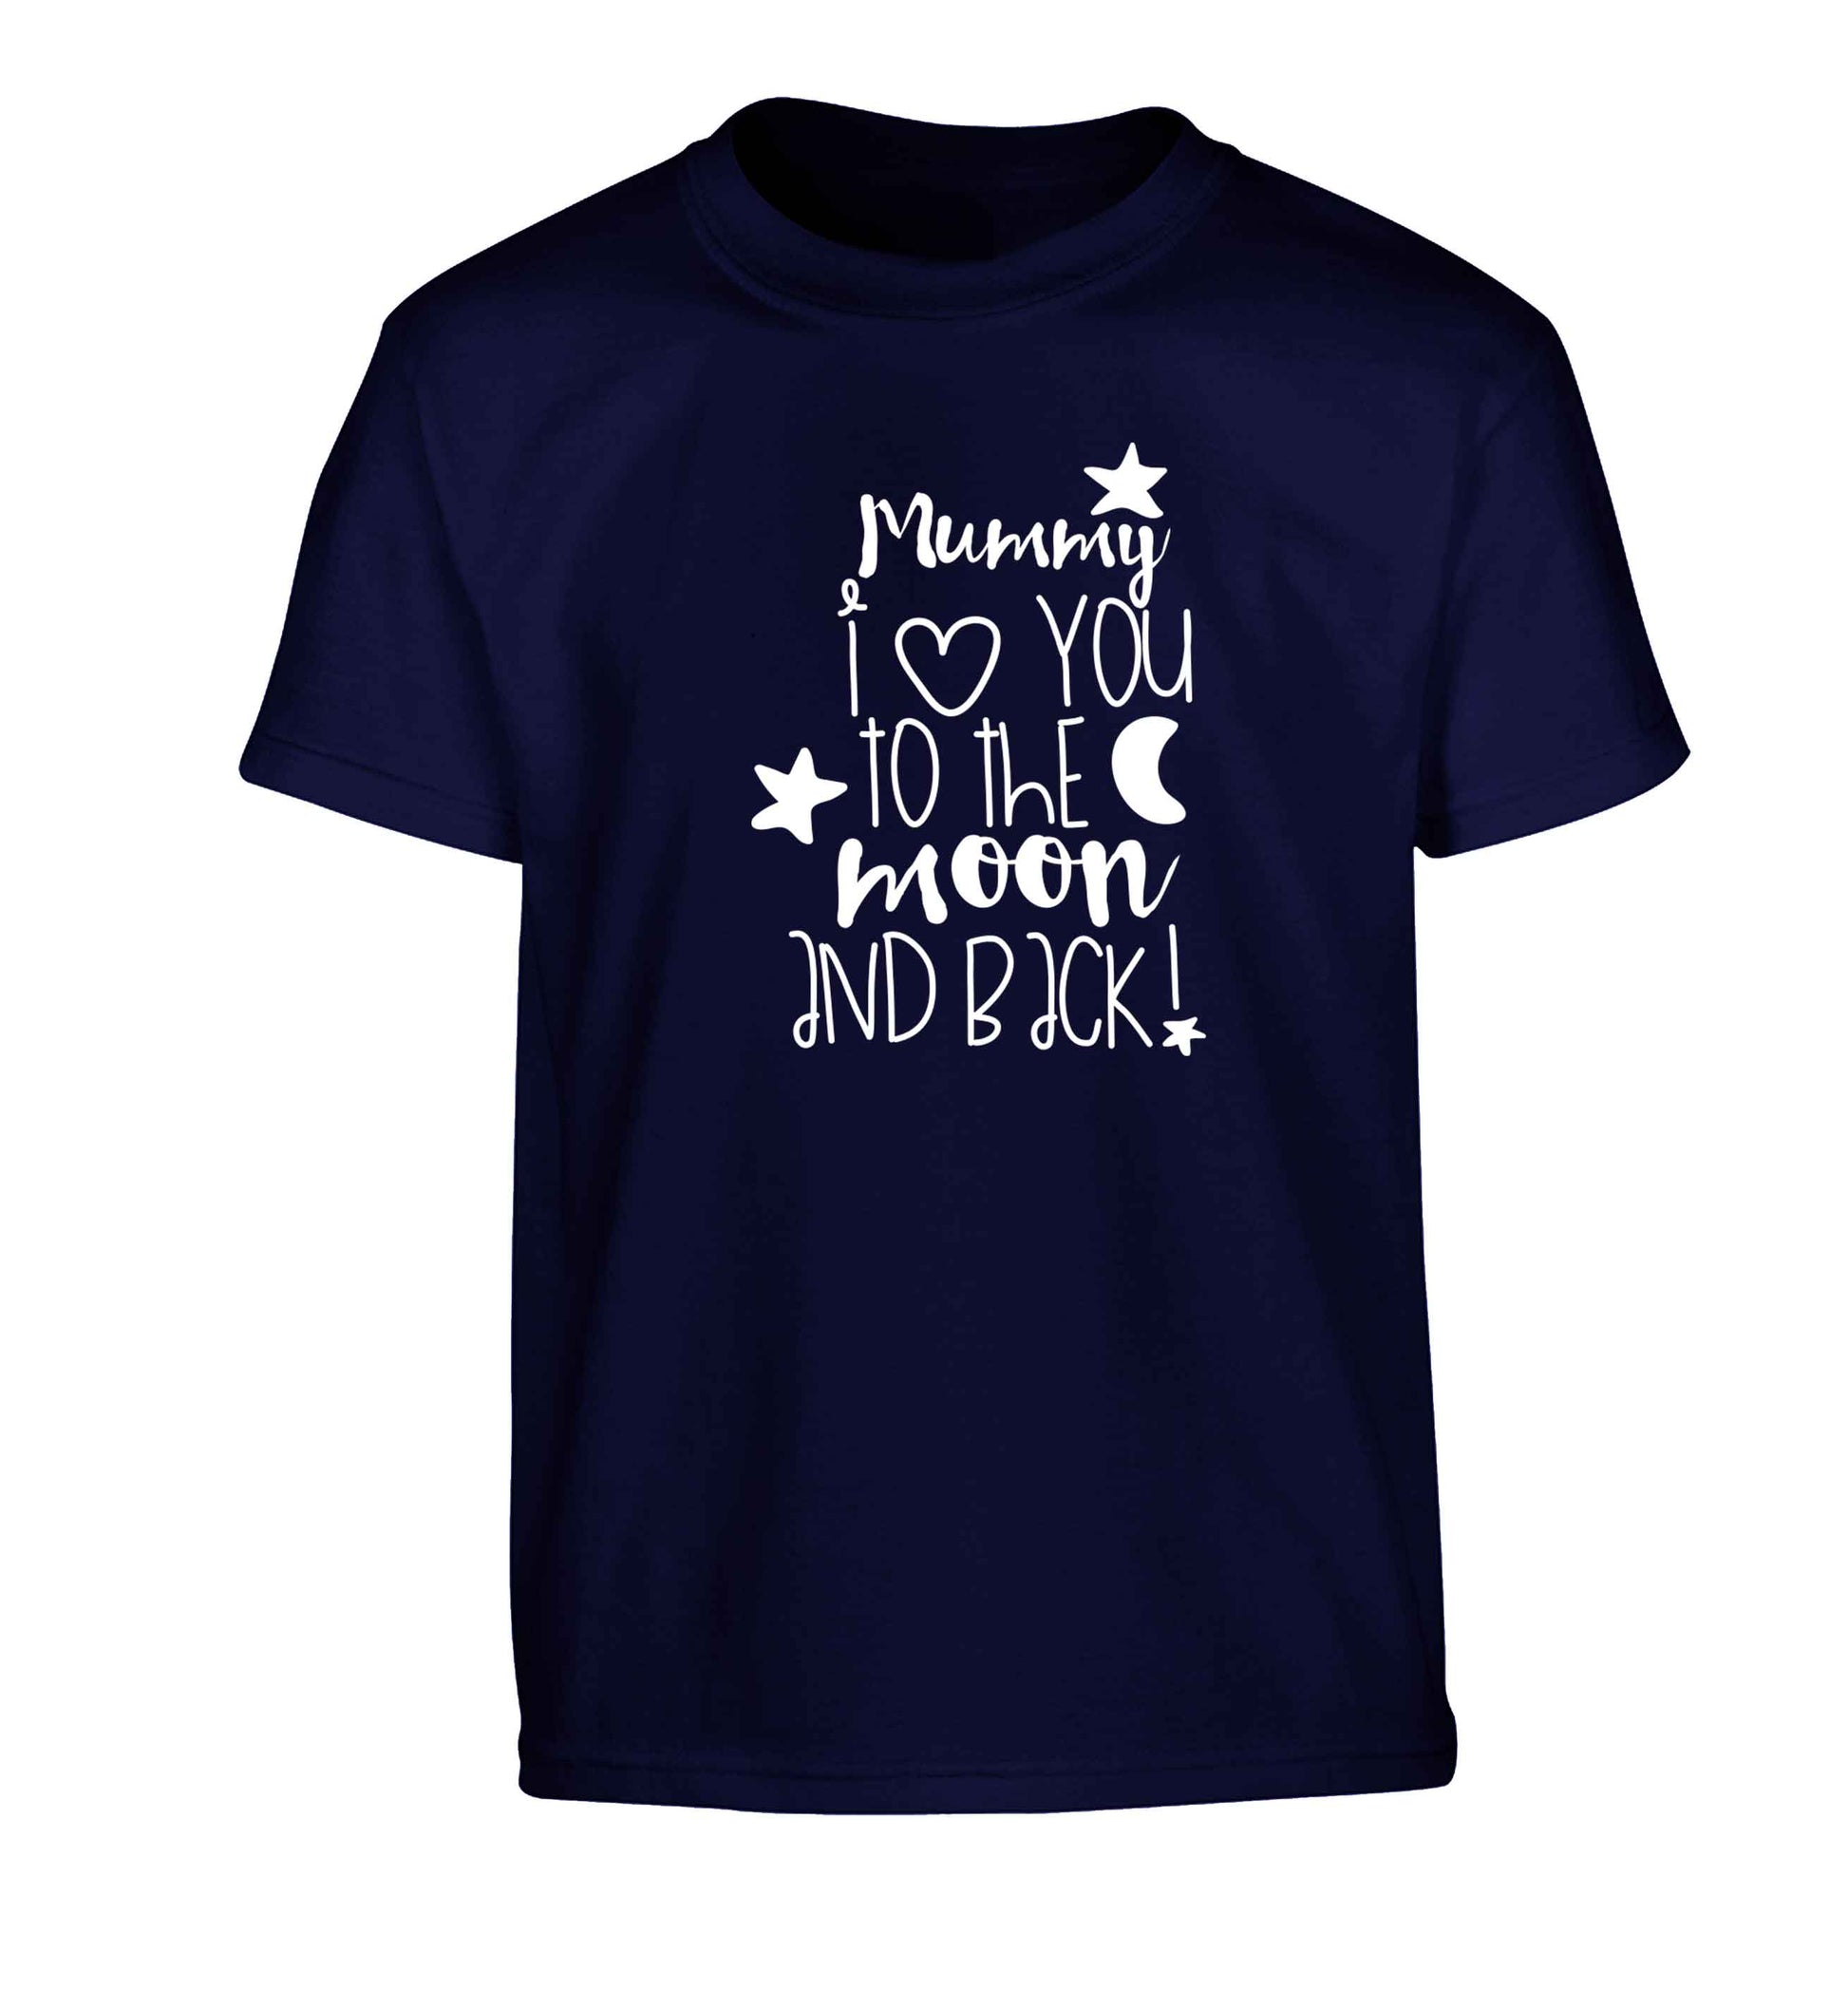 Mummy I love you to the moon and back Children's navy Tshirt 12-13 Years